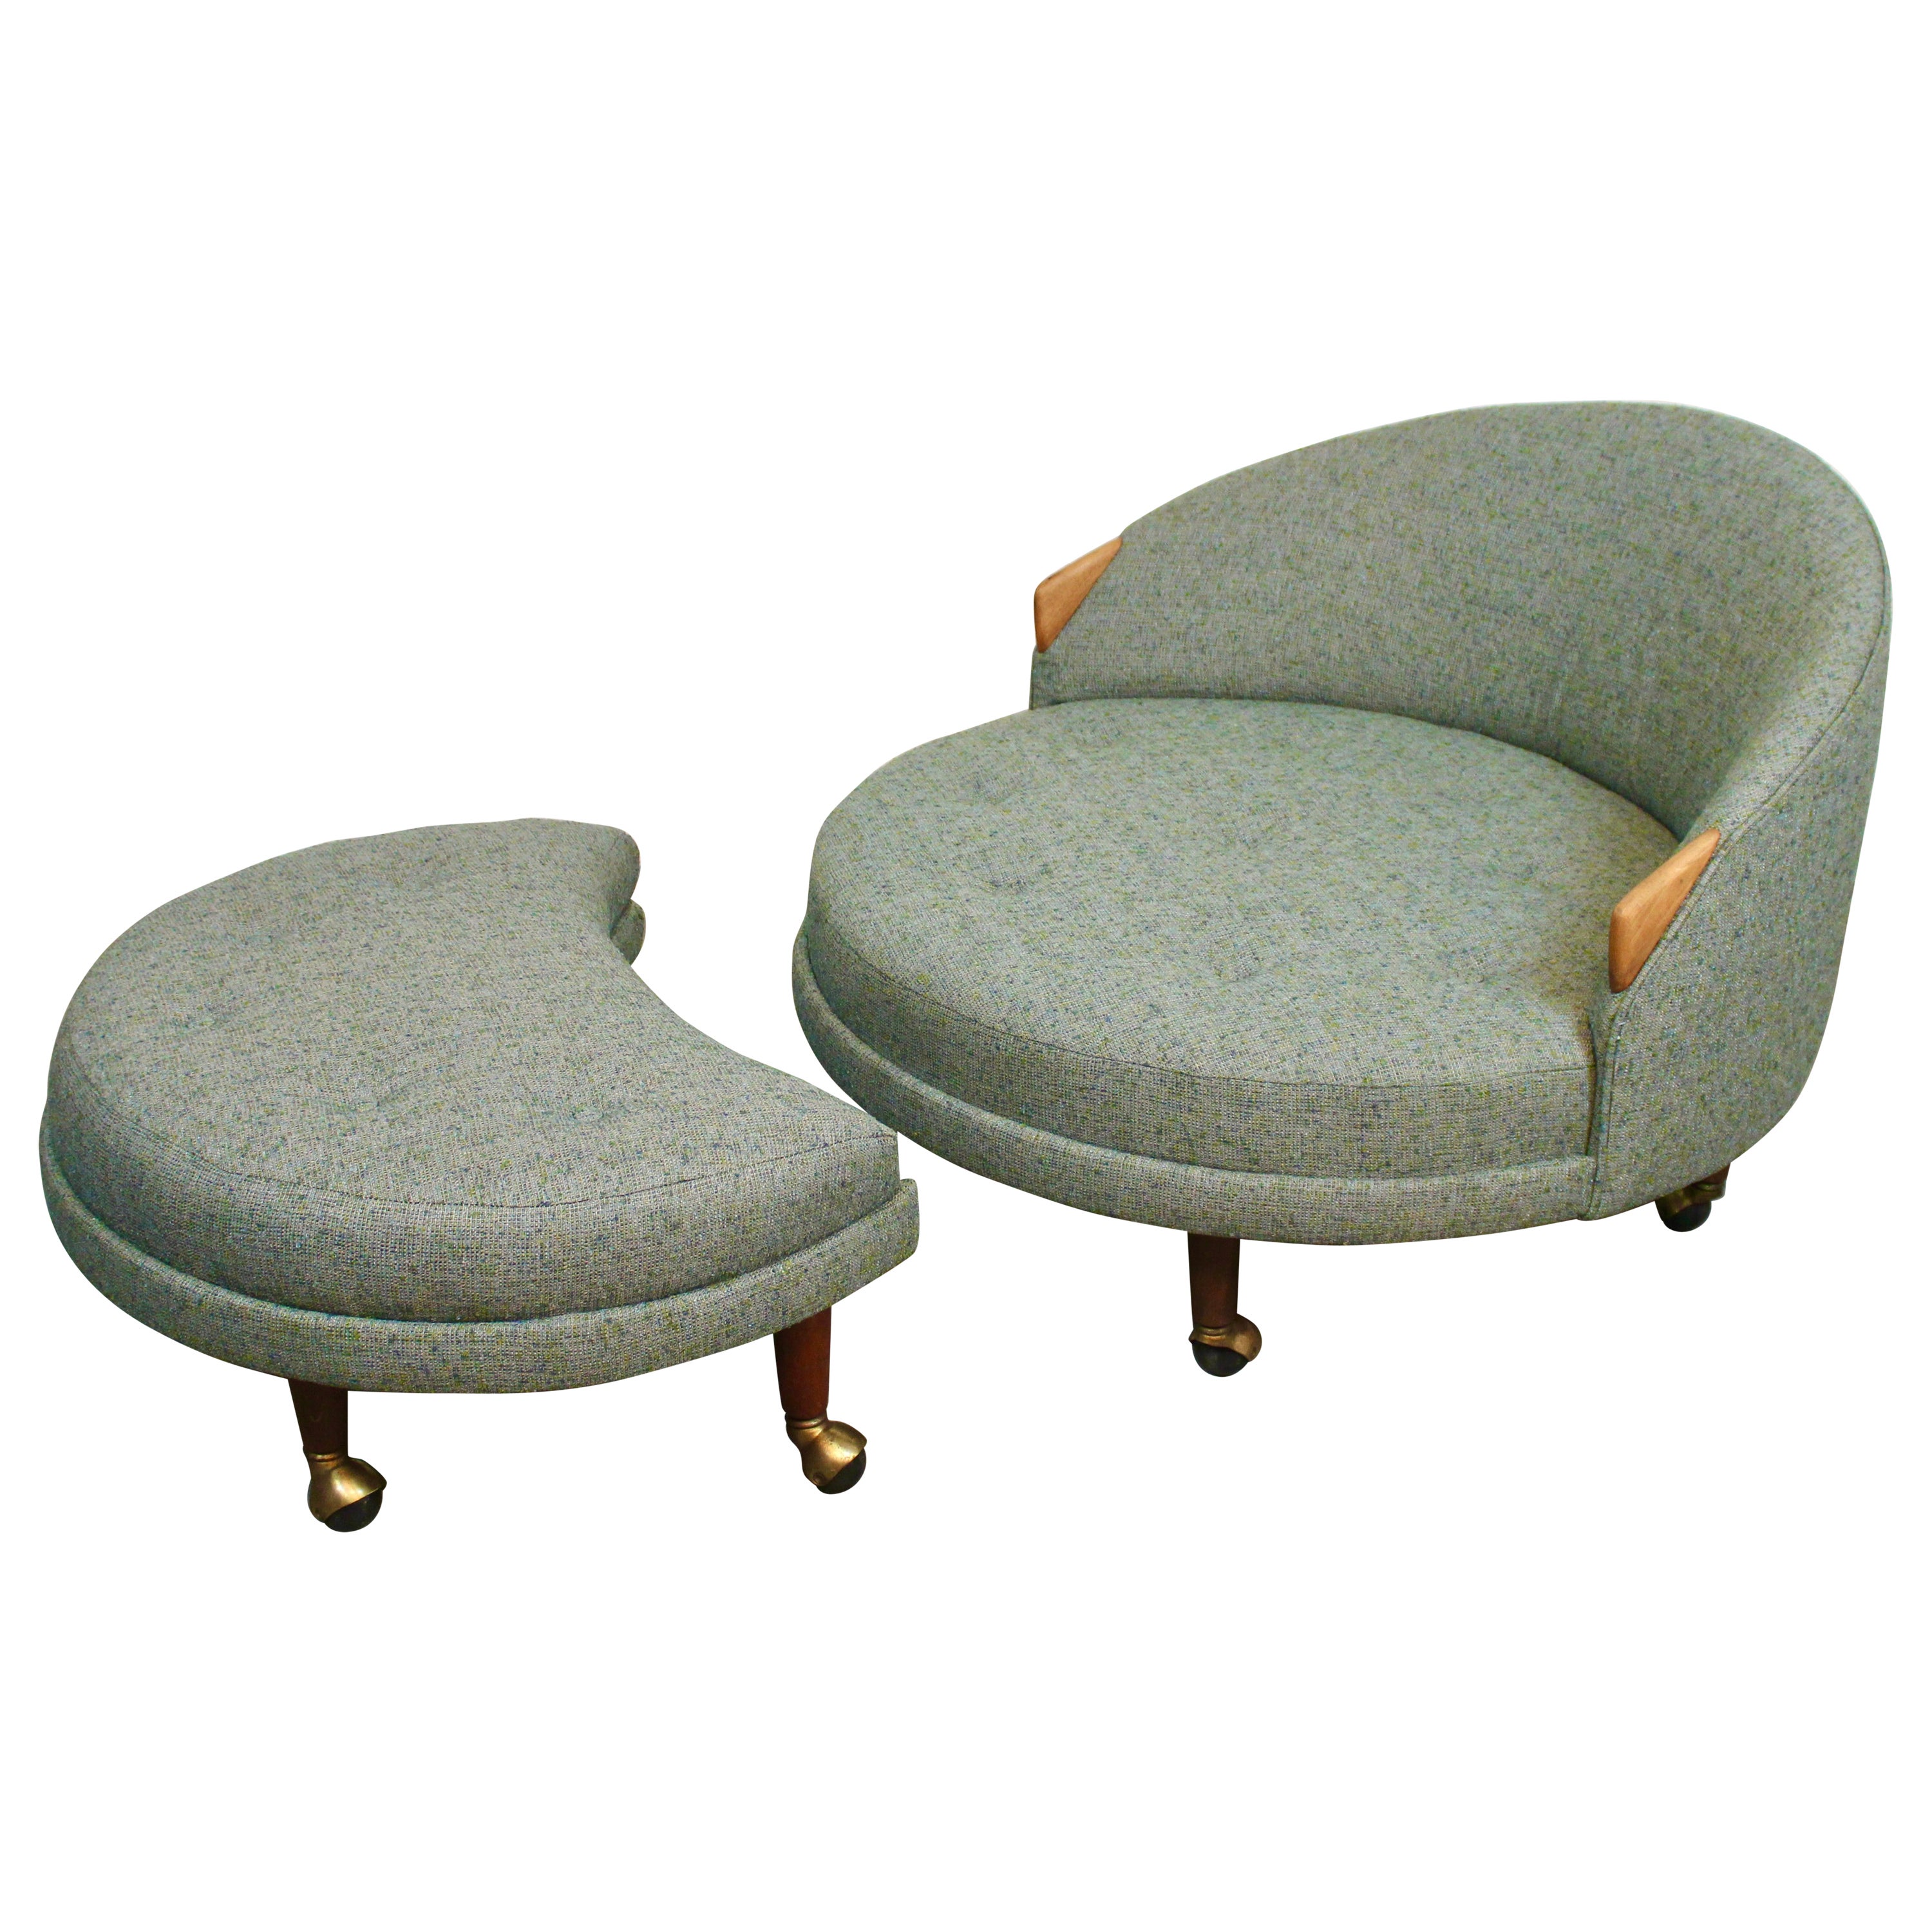 Adrian Pearsall "Havana" Lounge Chair and Ottoman for Craft Associates